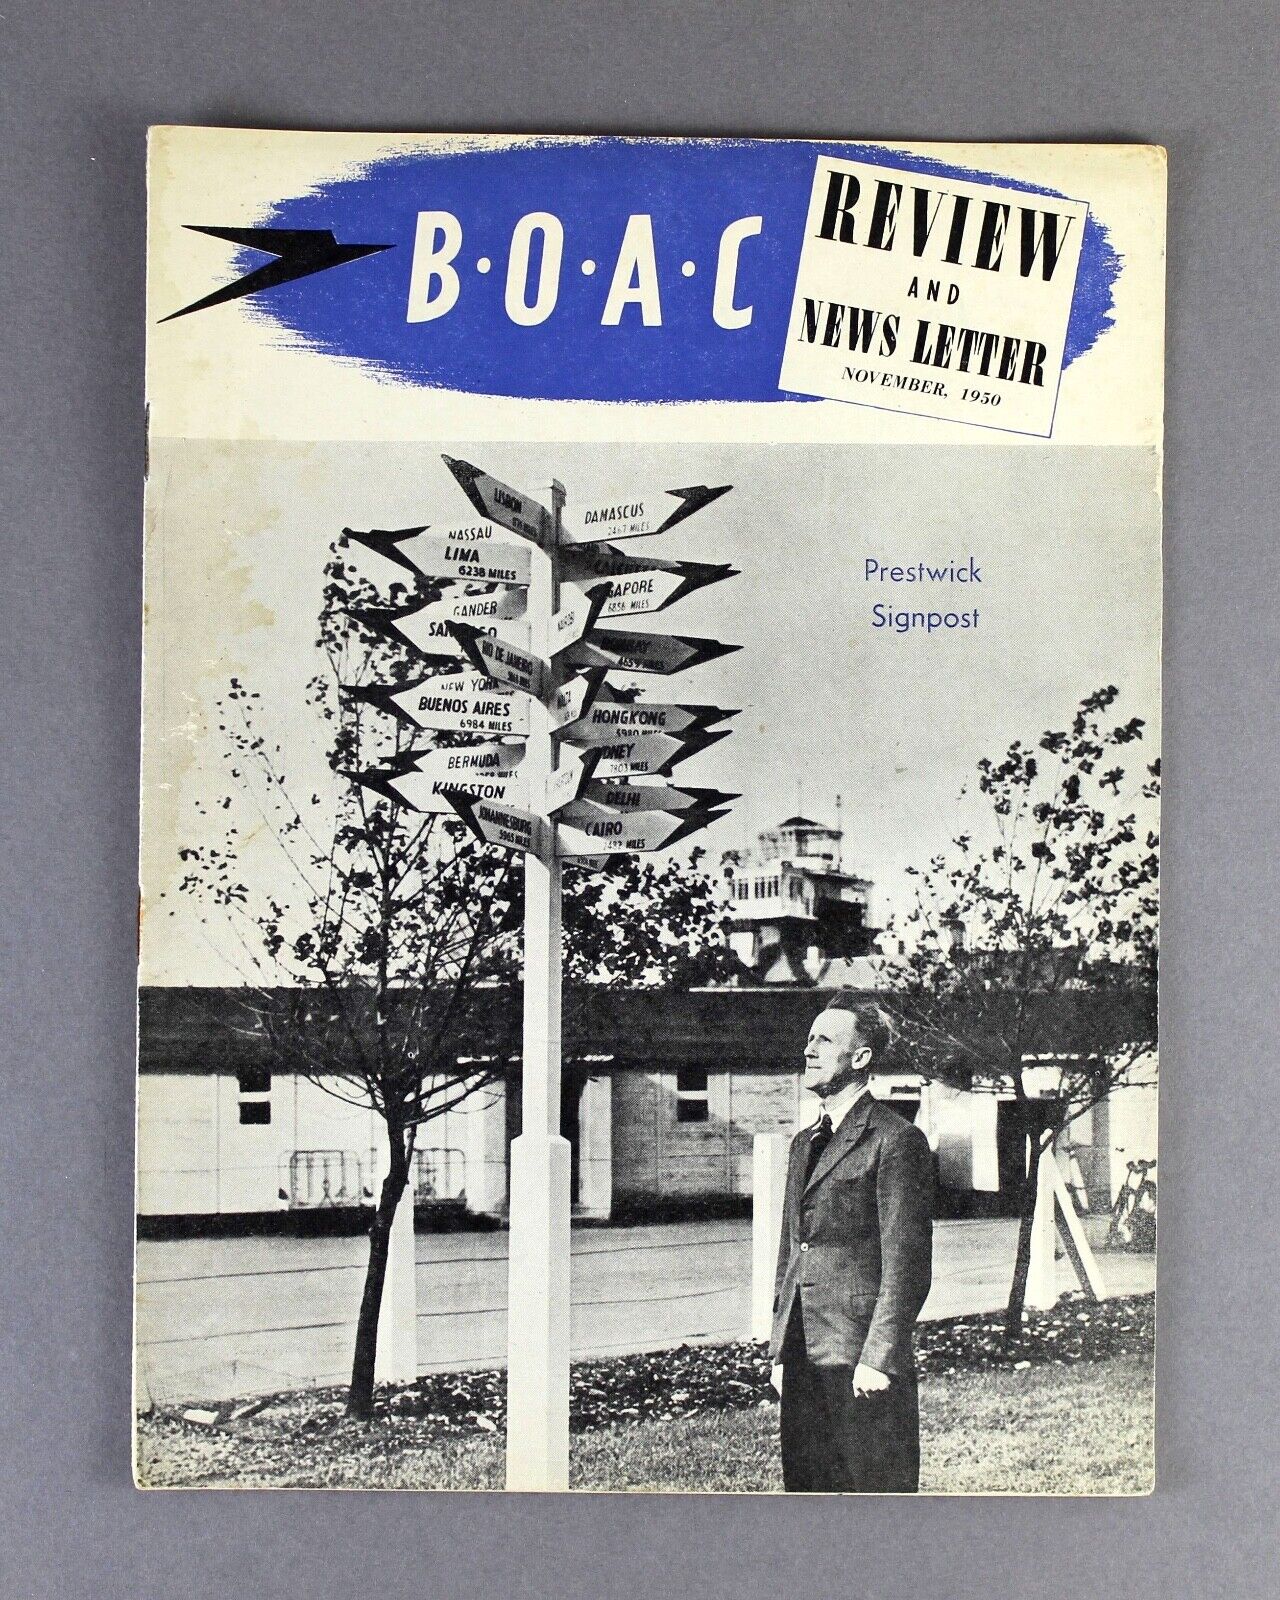 BOAC REVIEW & NEWS LETTER STAFF MAGAZINE NOVEMBER 1950 GETTING READY FOR COMET